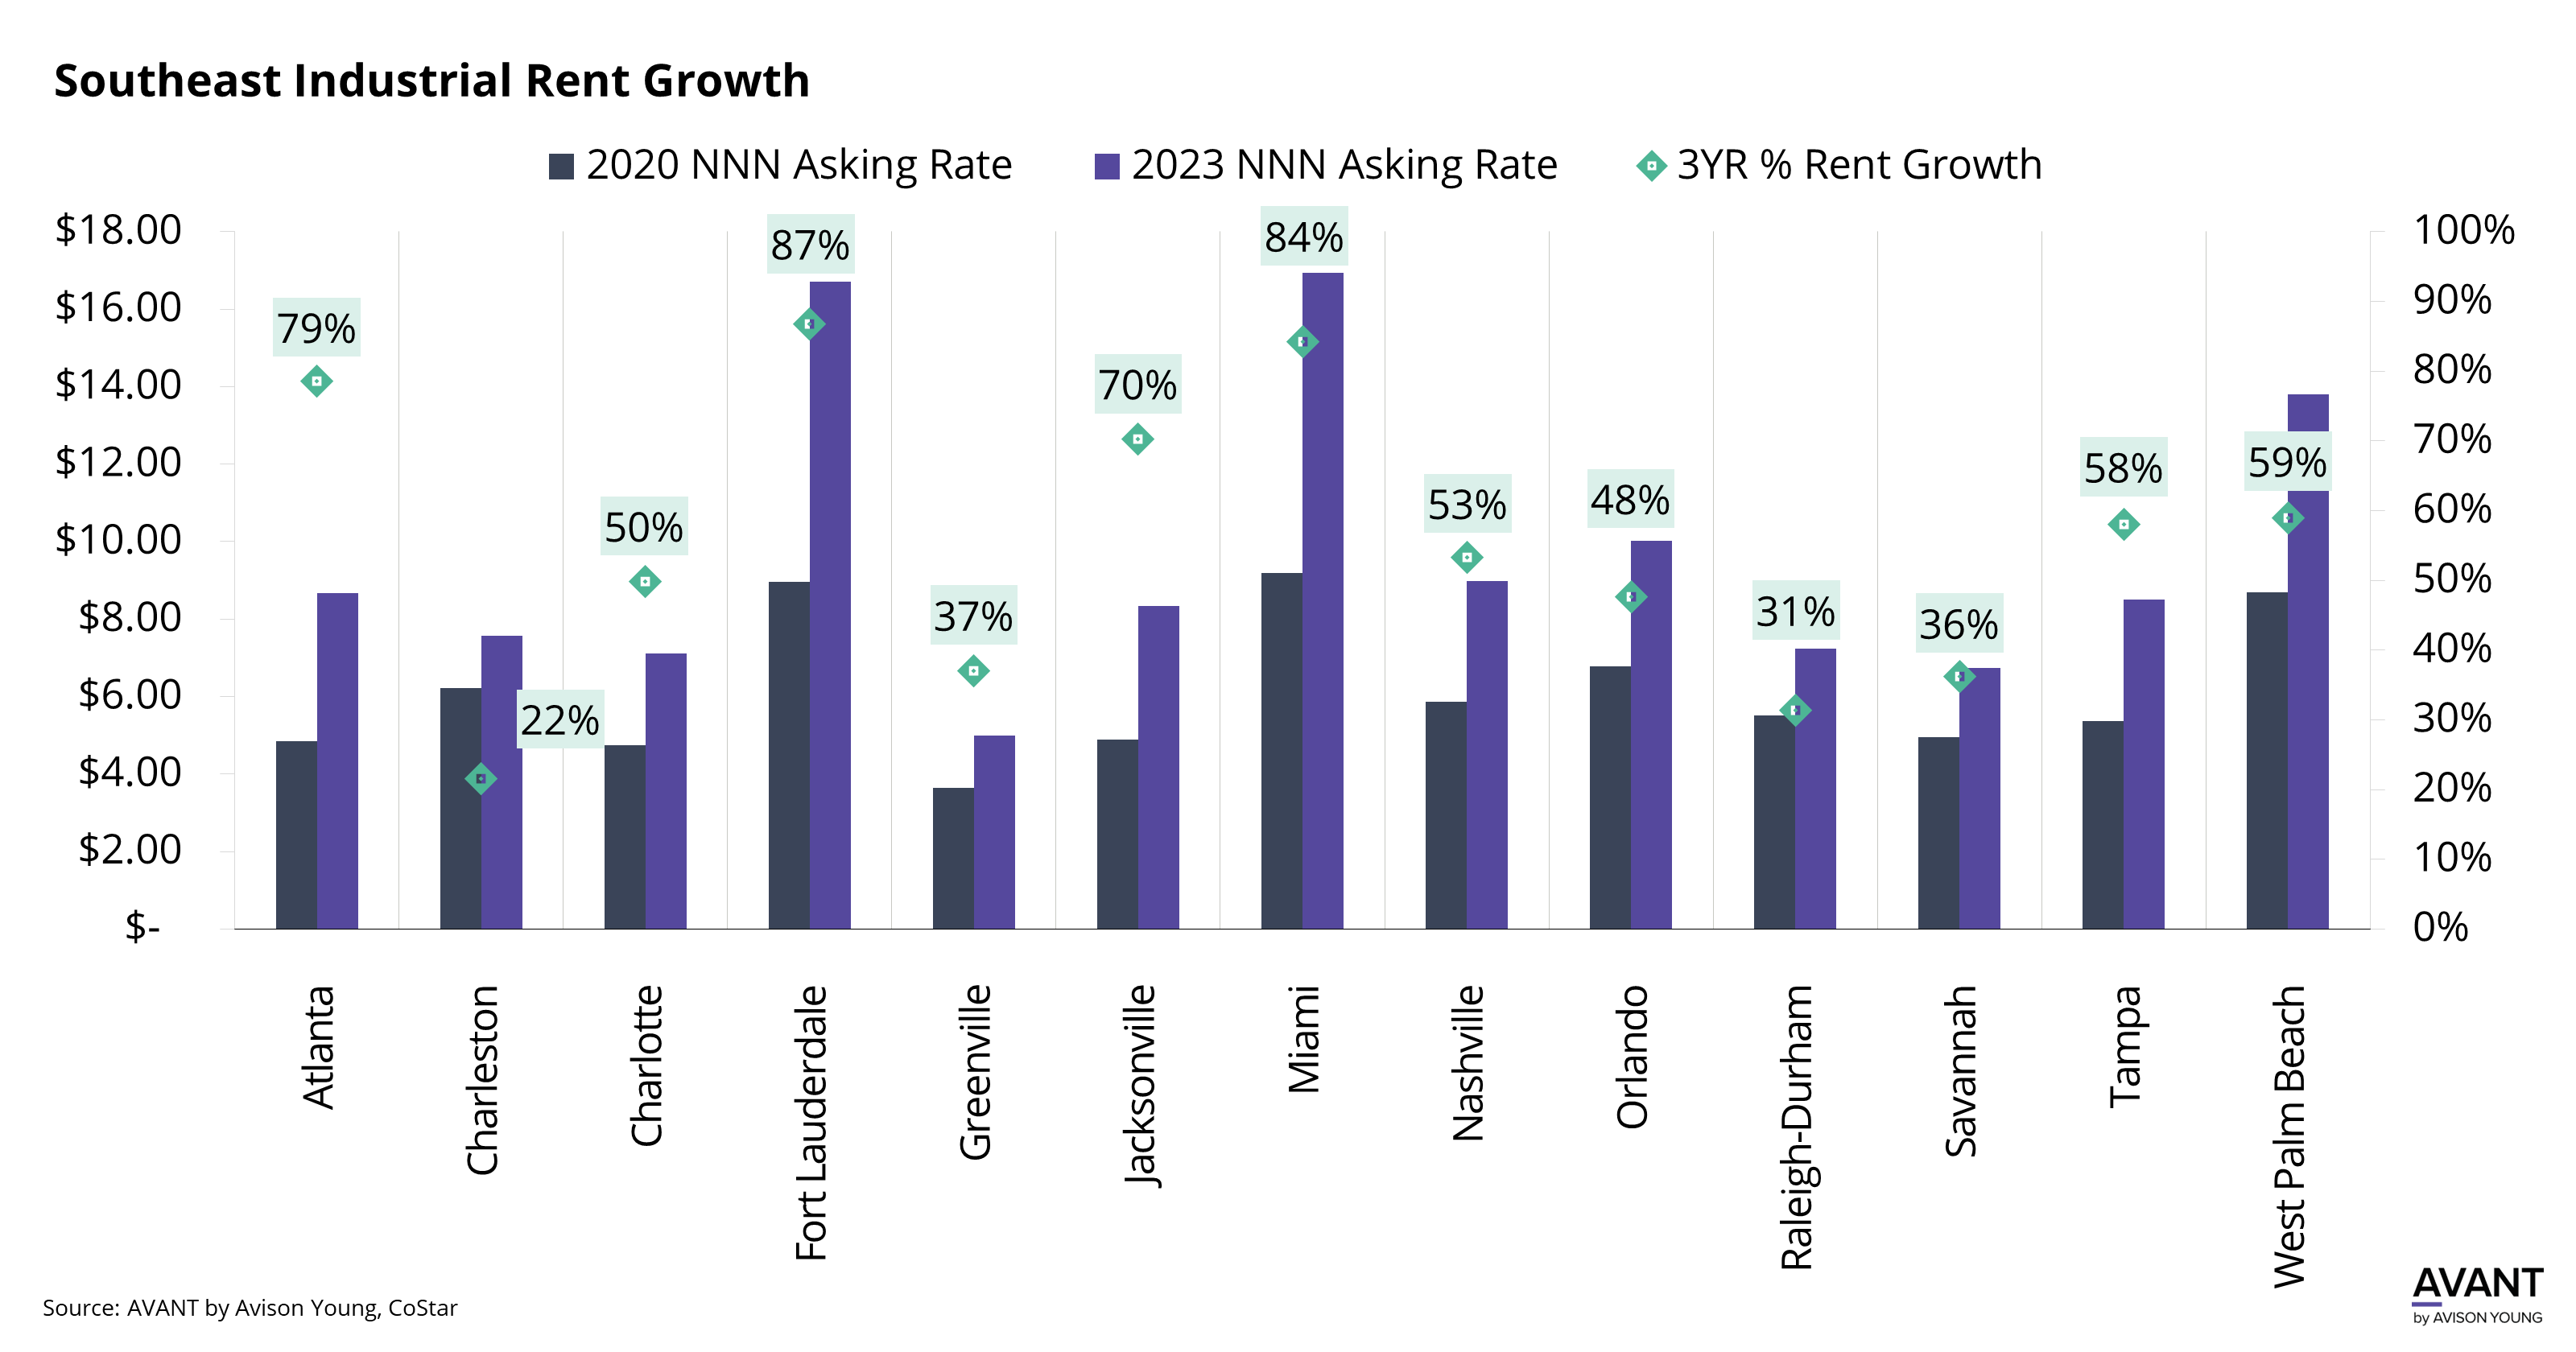 graph of Southeast industrial rent growth comparing 2020 to 2023 NNN asking rent rates